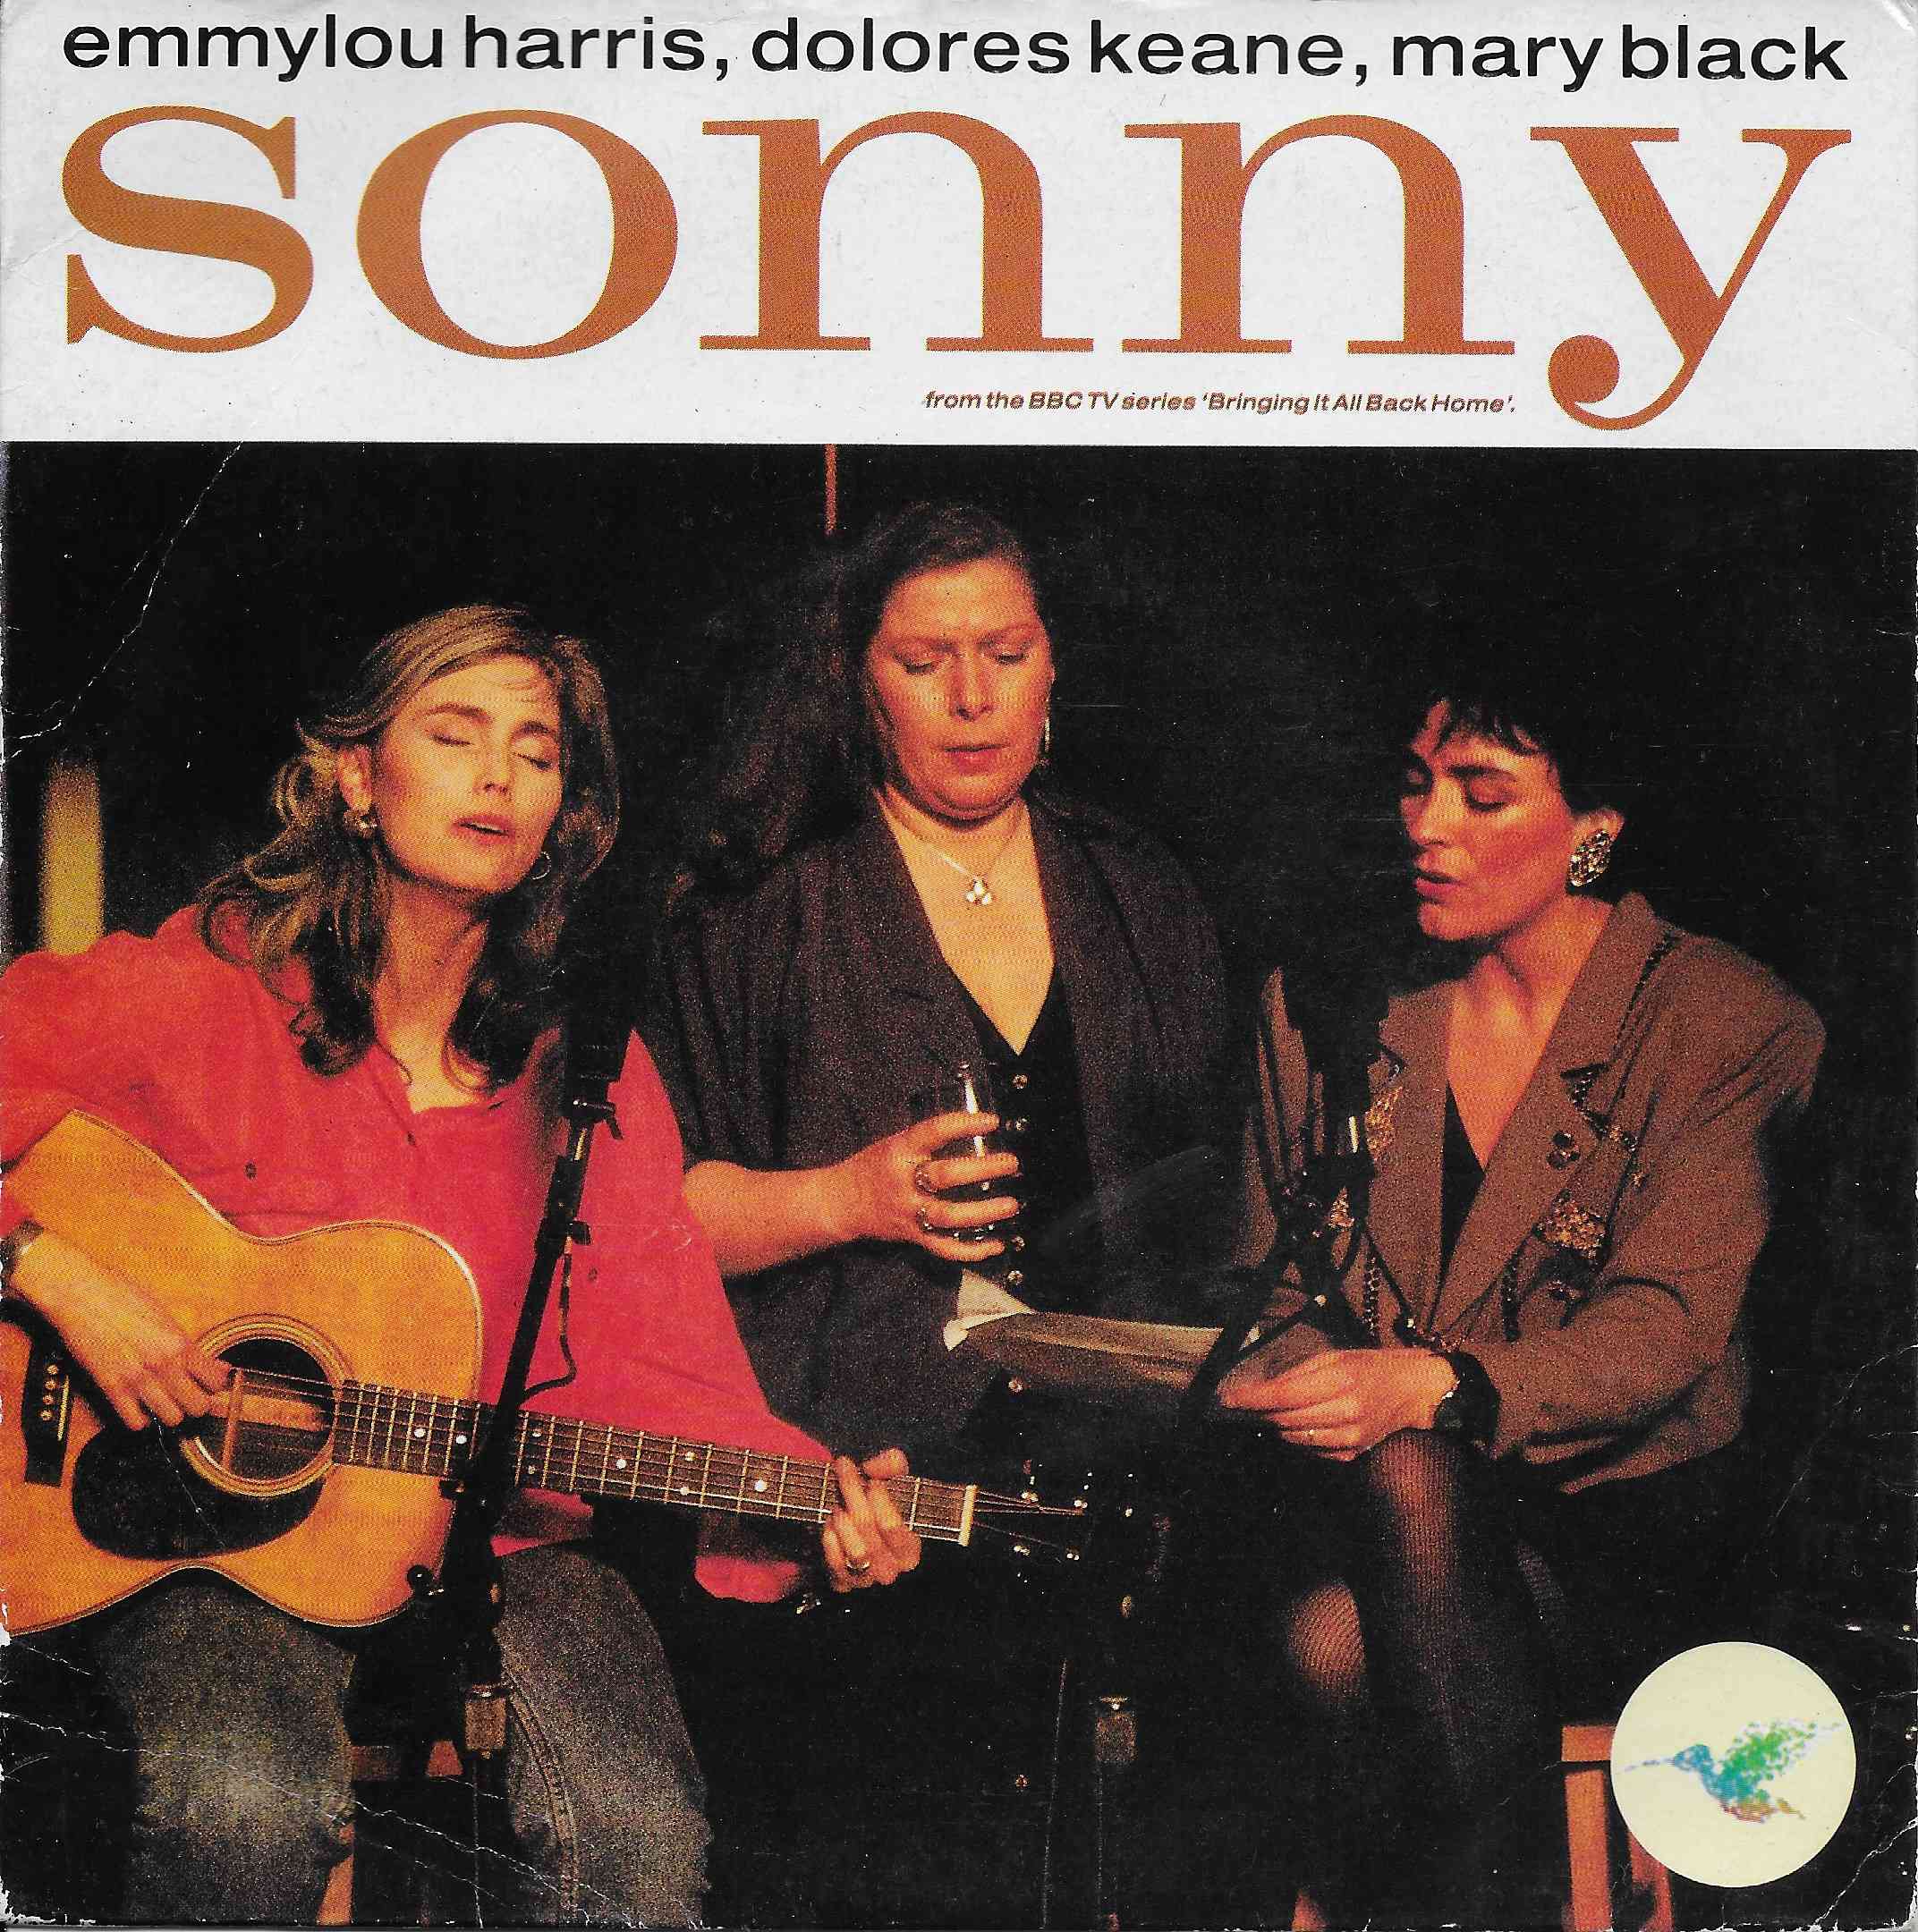 Picture of BIAB 1 Sonny by artist R. Hynes / The Voice Squad / Emmylou Harris / Dolores Keane / Mary Black from the BBC records and Tapes library